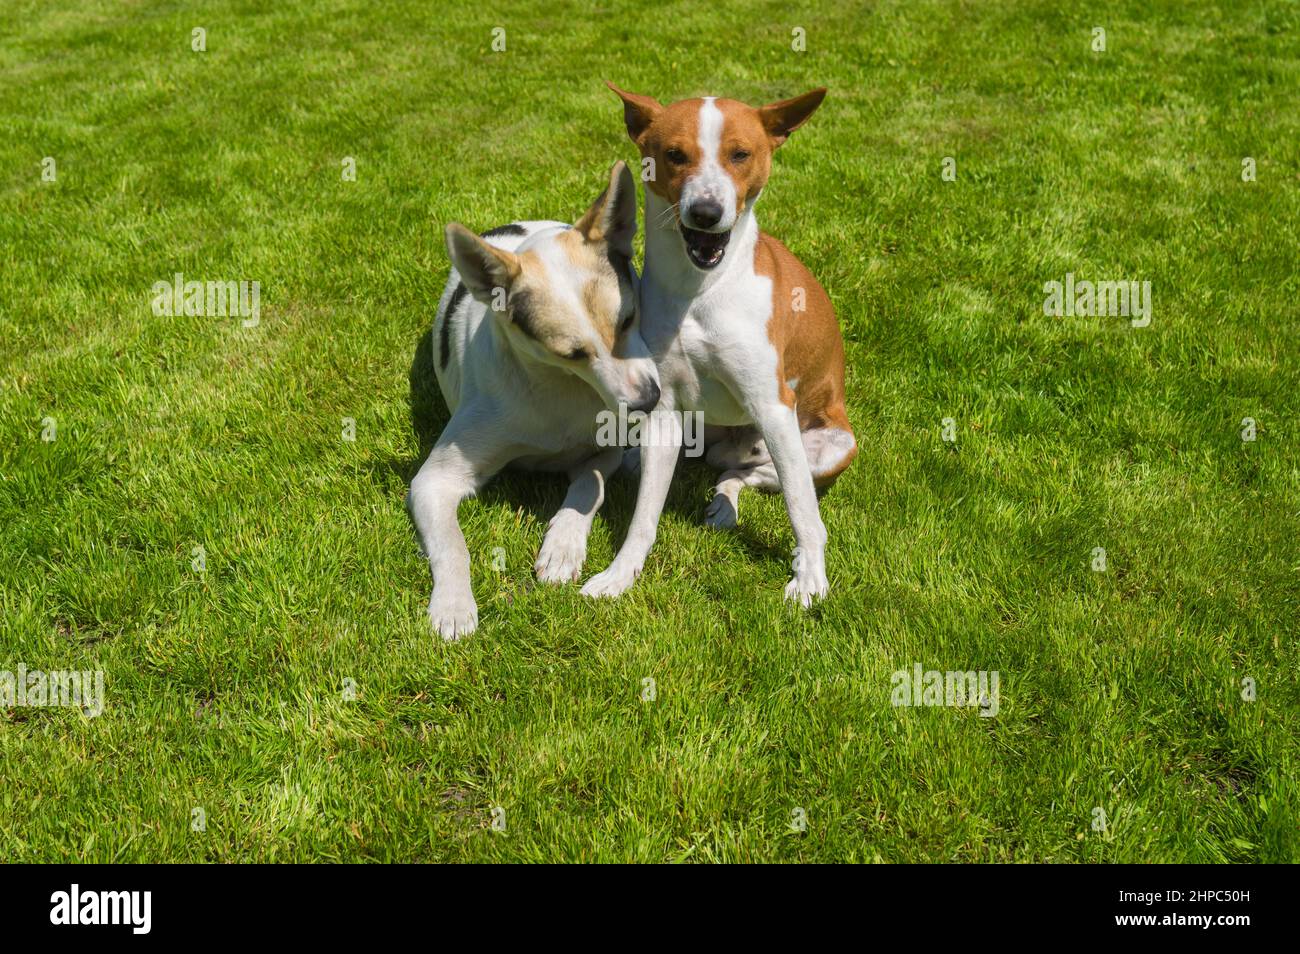 Young mixed breed dog bites basenji dog  to right leg  while sitting on a fresh lawn Stock Photo